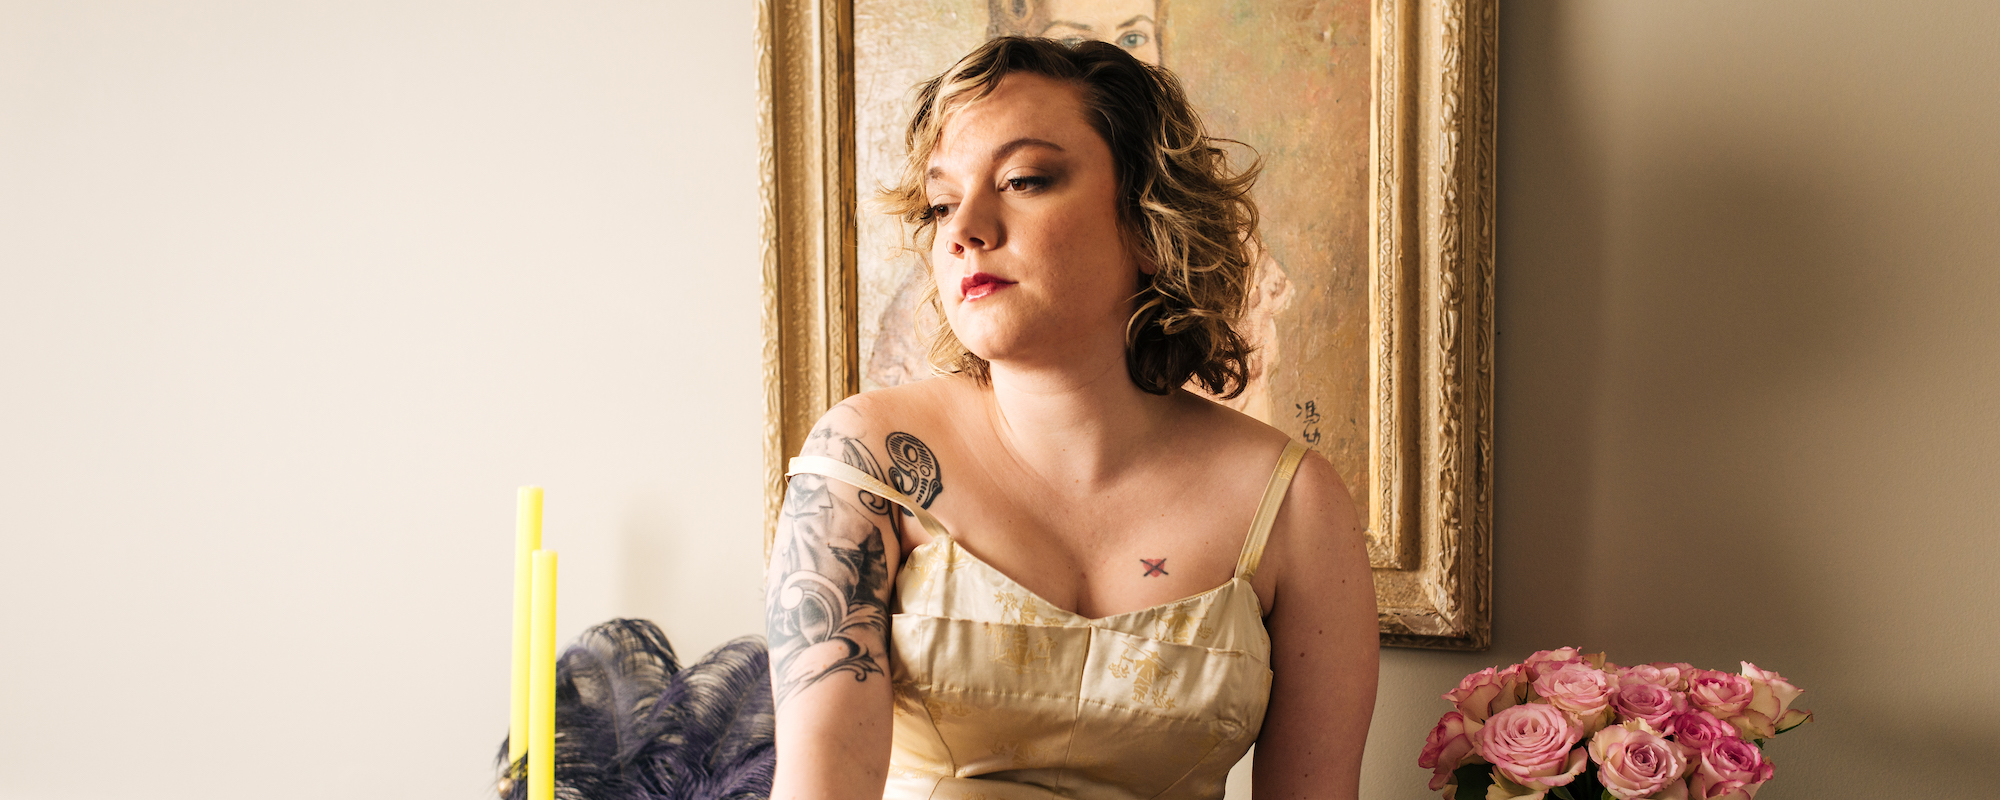 Lydia Loveless Flees From Hard Truths In New Song “Runaway”